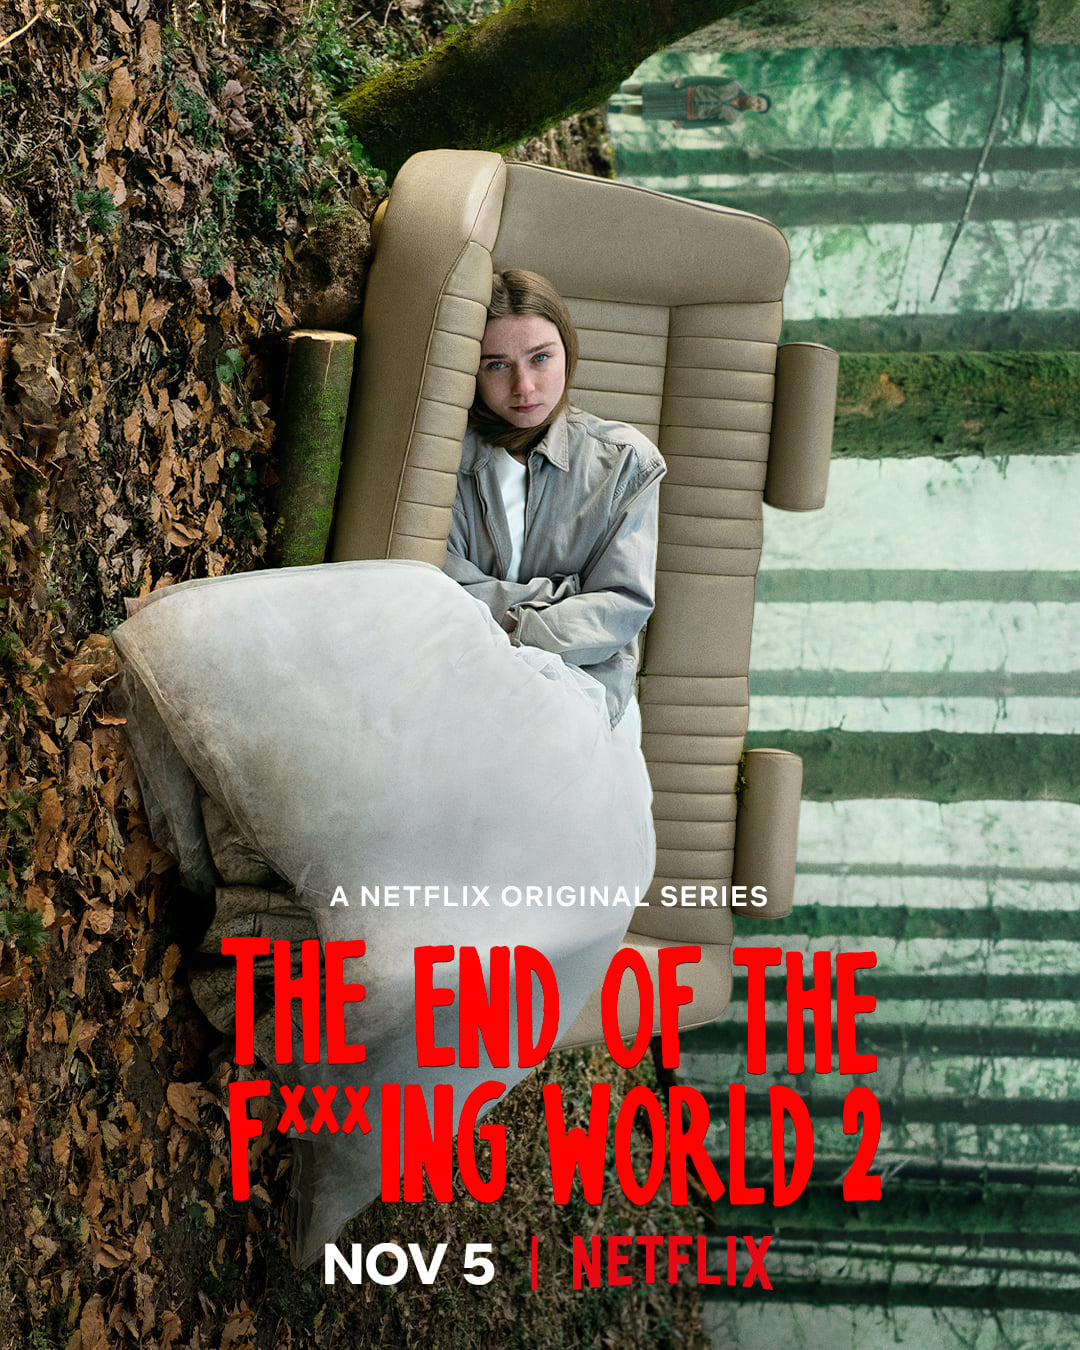 Extra Large TV Poster Image for The End of the F***ing World (#3 of 5)